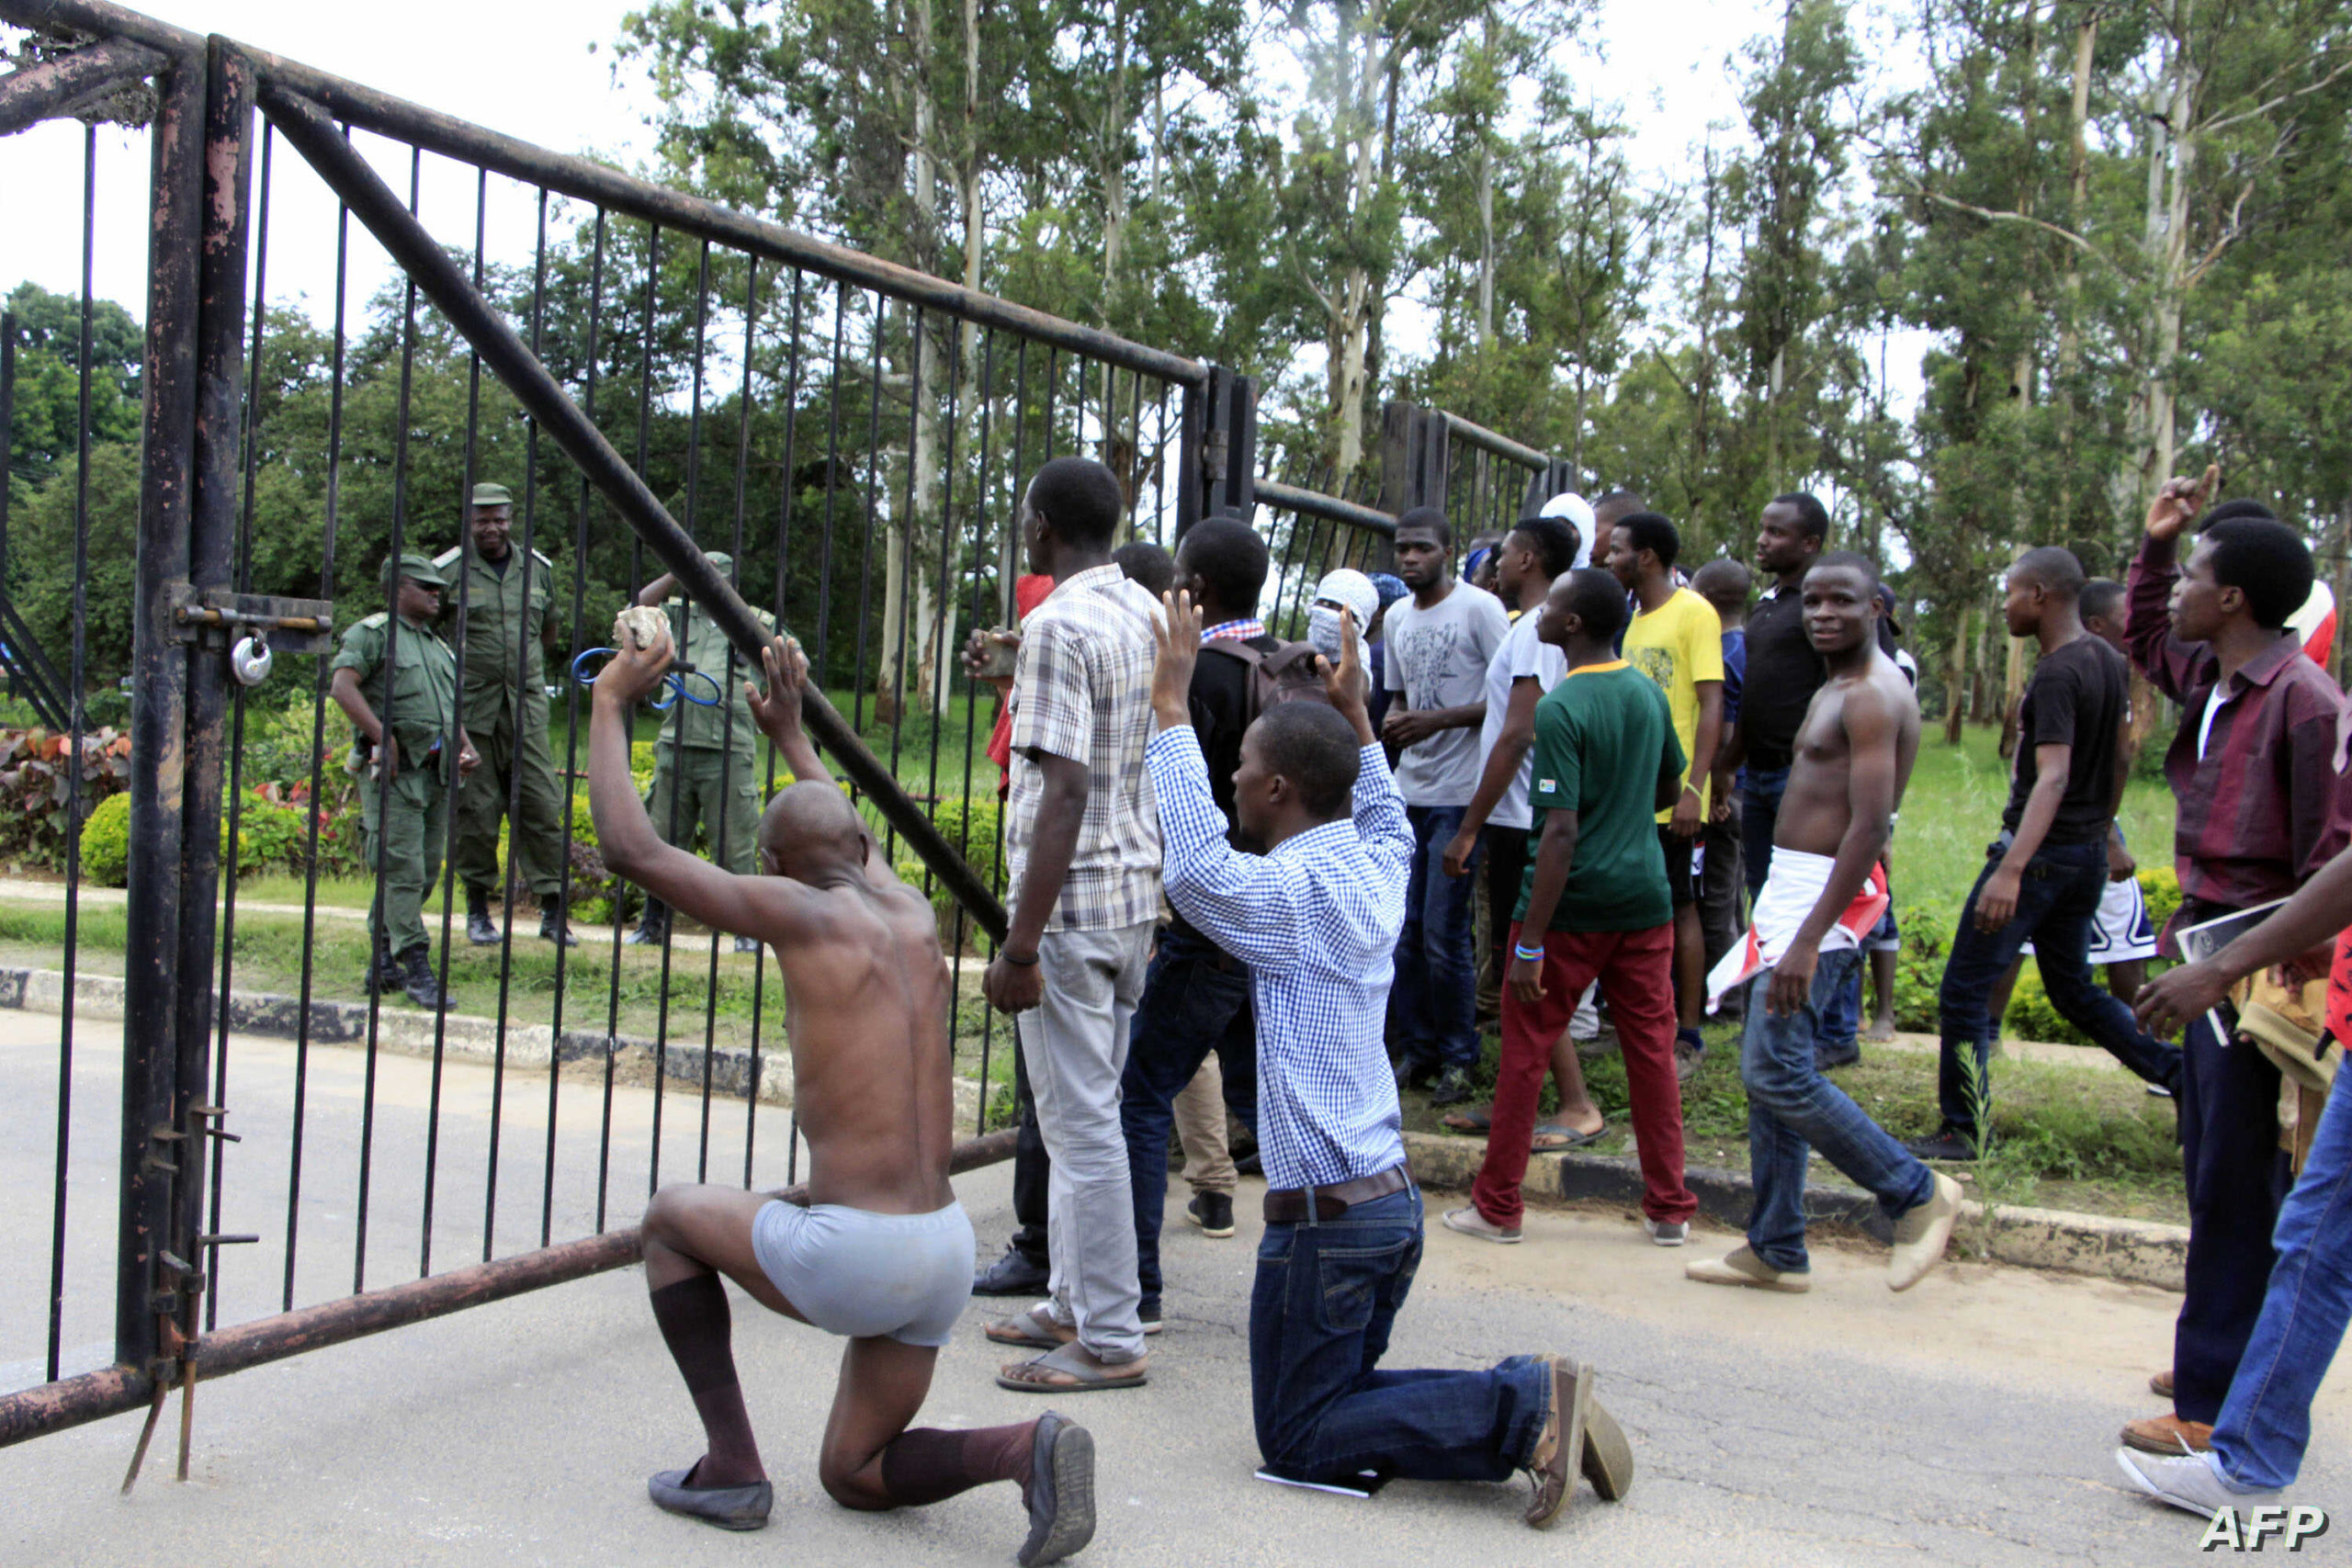 How Zambia Protests Was Stopped With Unlawful Force - Amnesty